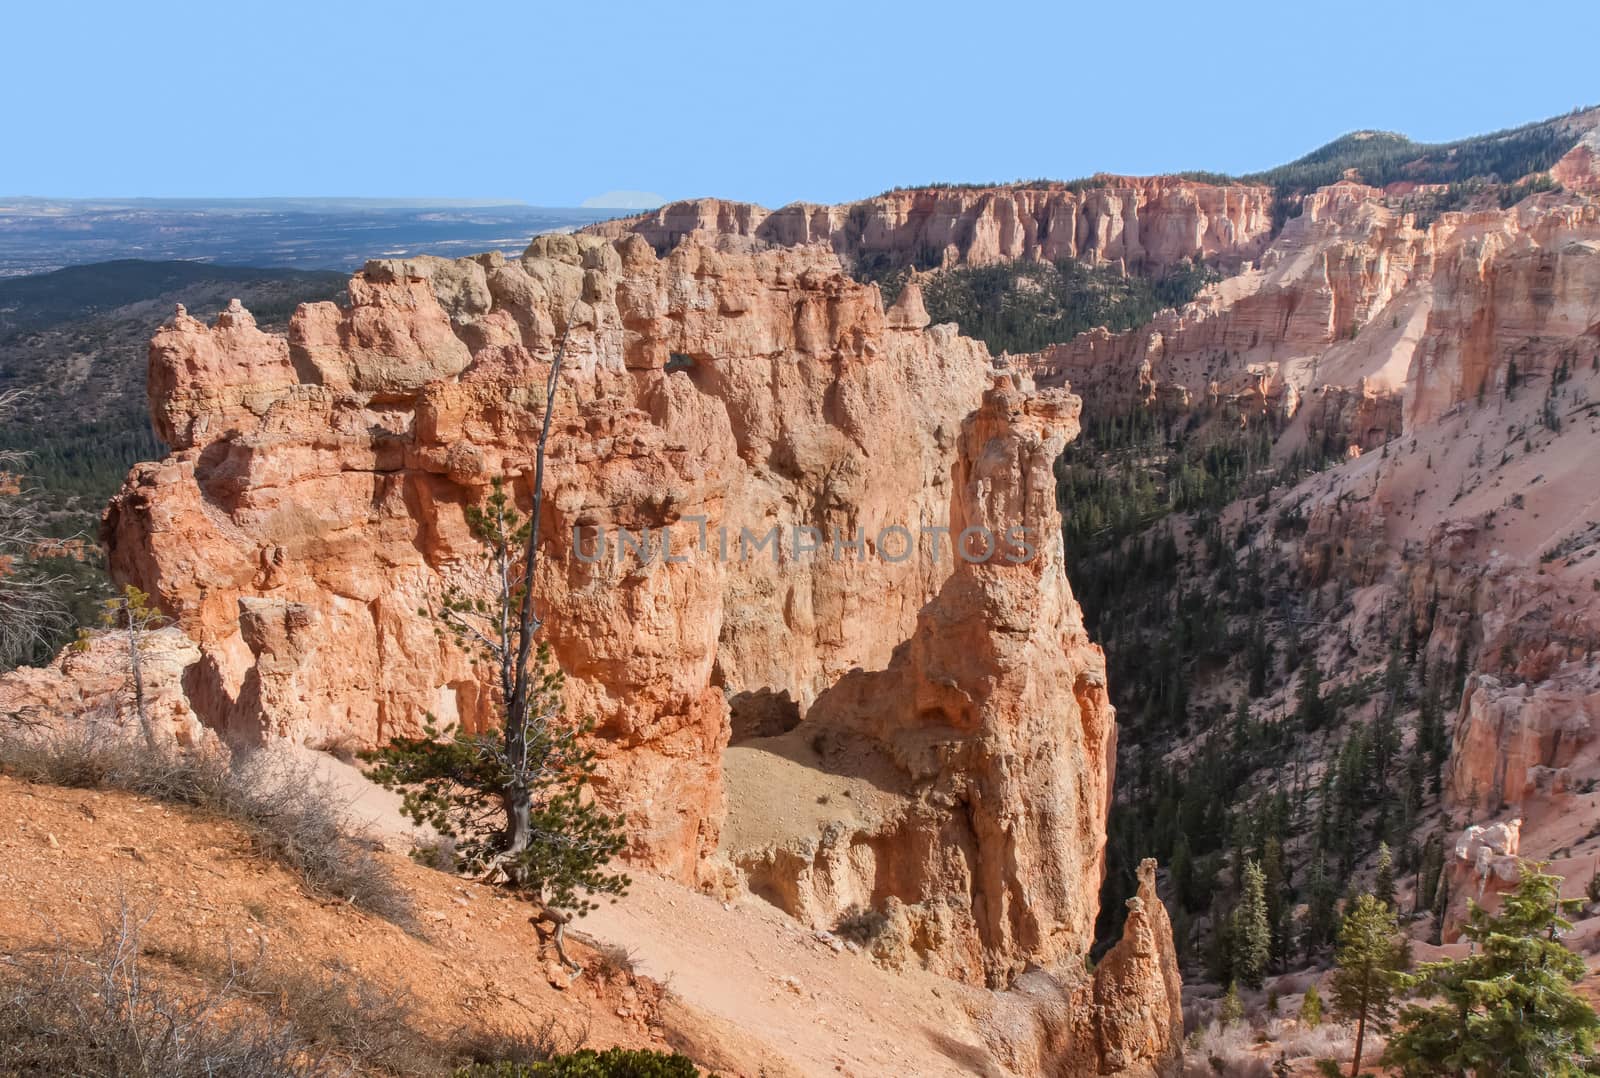 Overlooking Black Birch Canyon in Bryce National Park is this formation that looks like a castle turret.